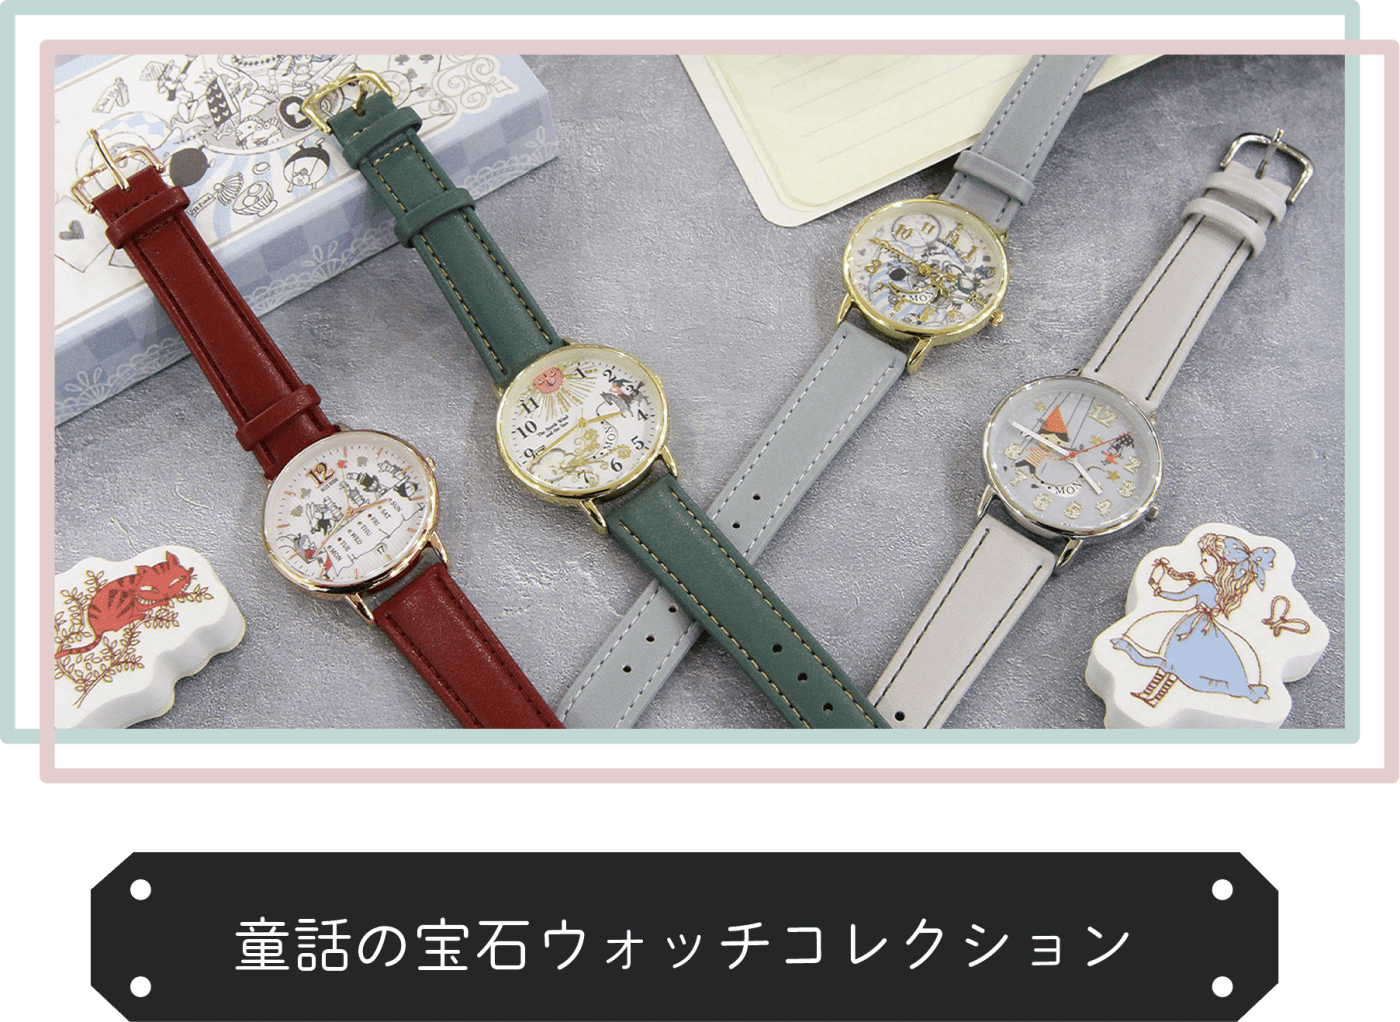 Fairy tale jewelry watch collection